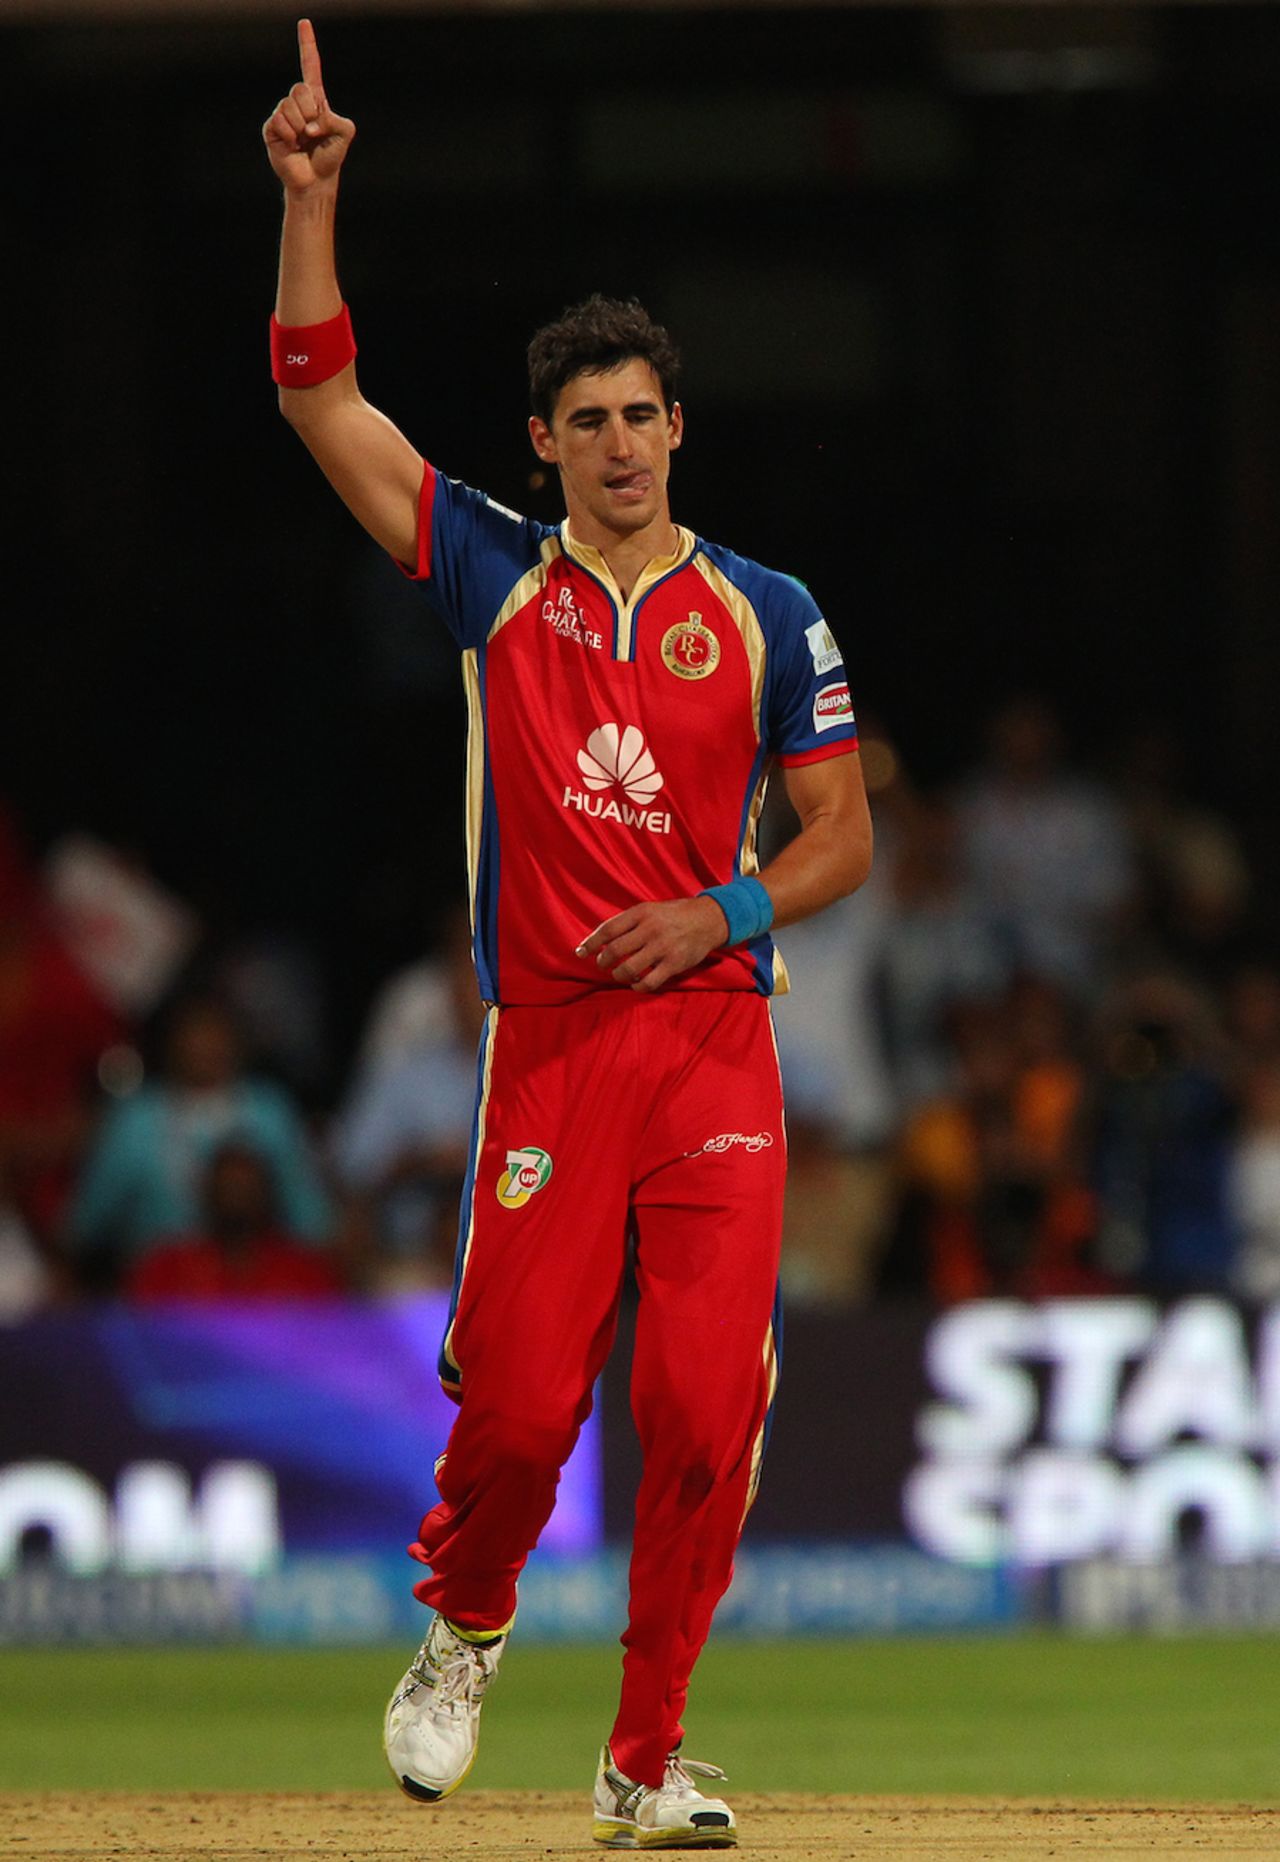 Mitchell Starc picked up the wicket of David Warner in the last over, Royal Challengers Bangalore v Sunrisers Hyderabad, IPL, Bangalore, May 4, 2014